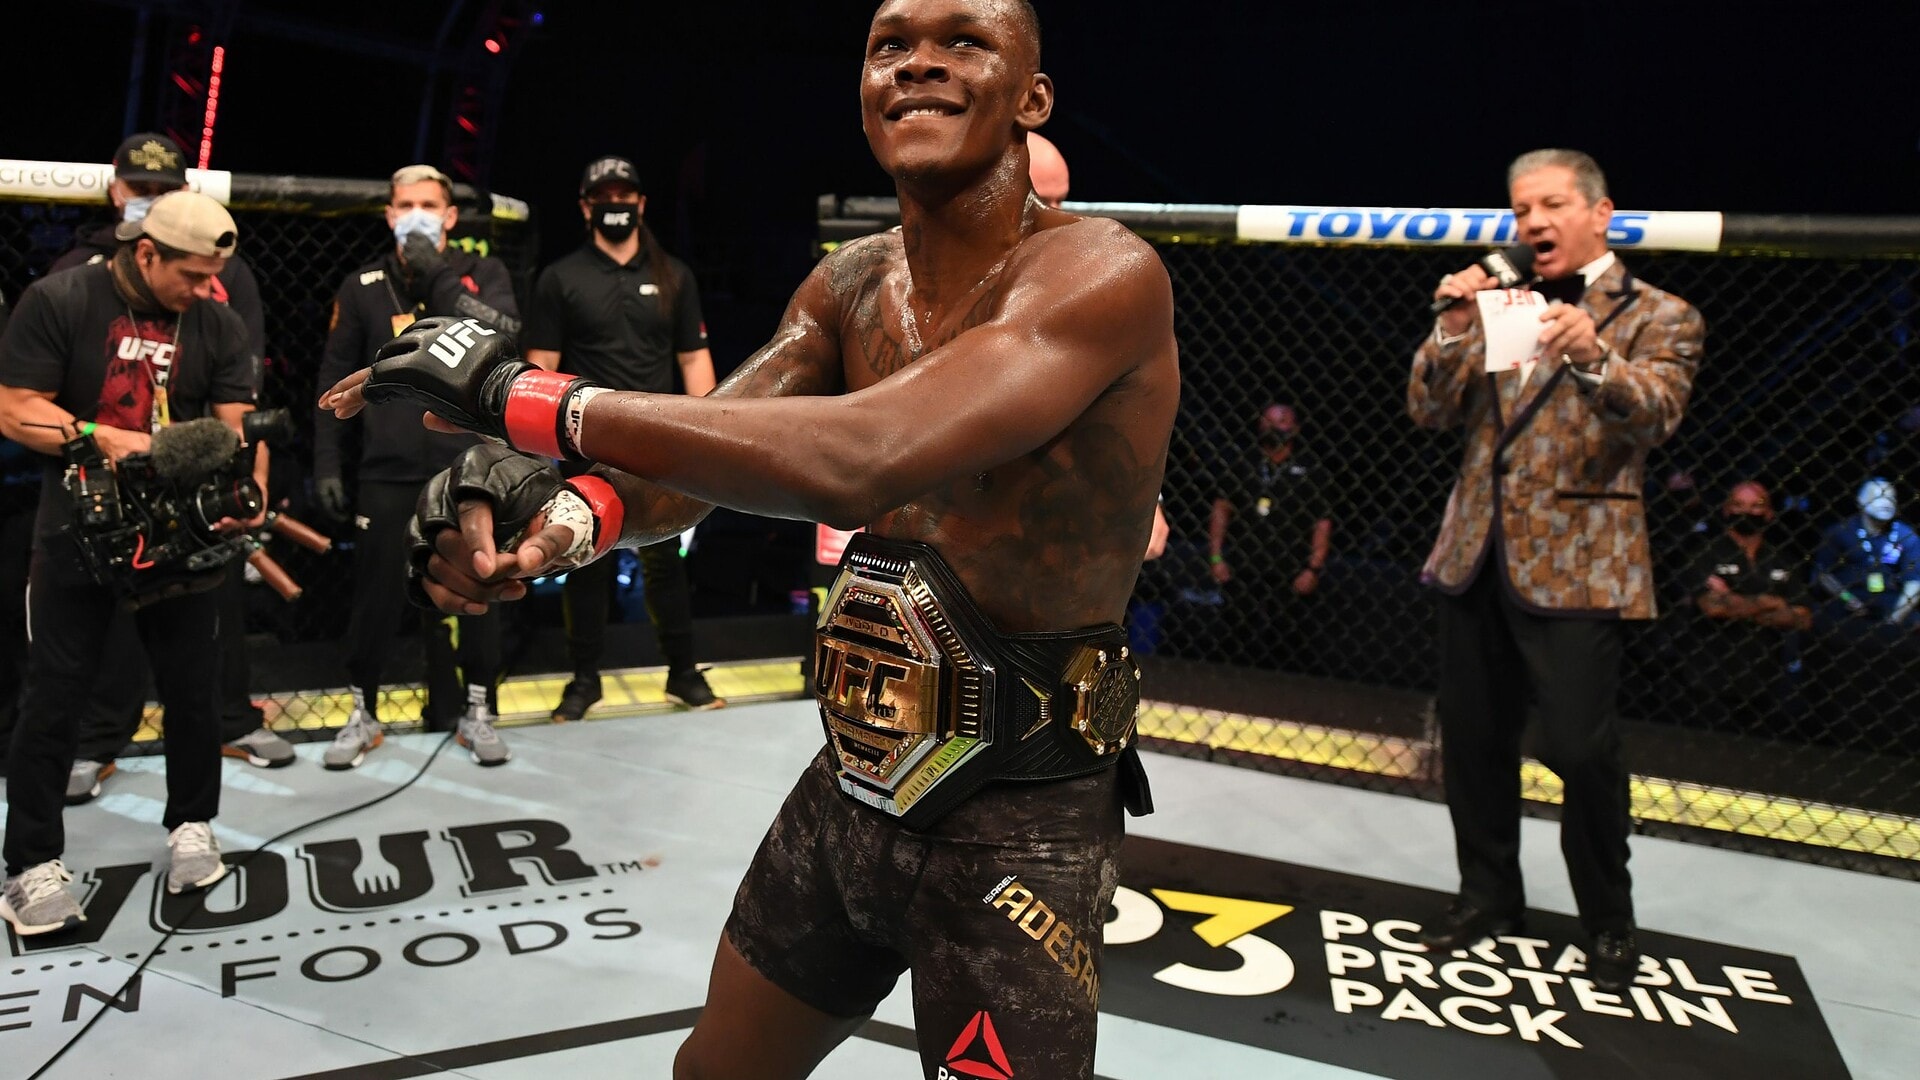 Can Israel Adesanya have another go at light heavyweight?